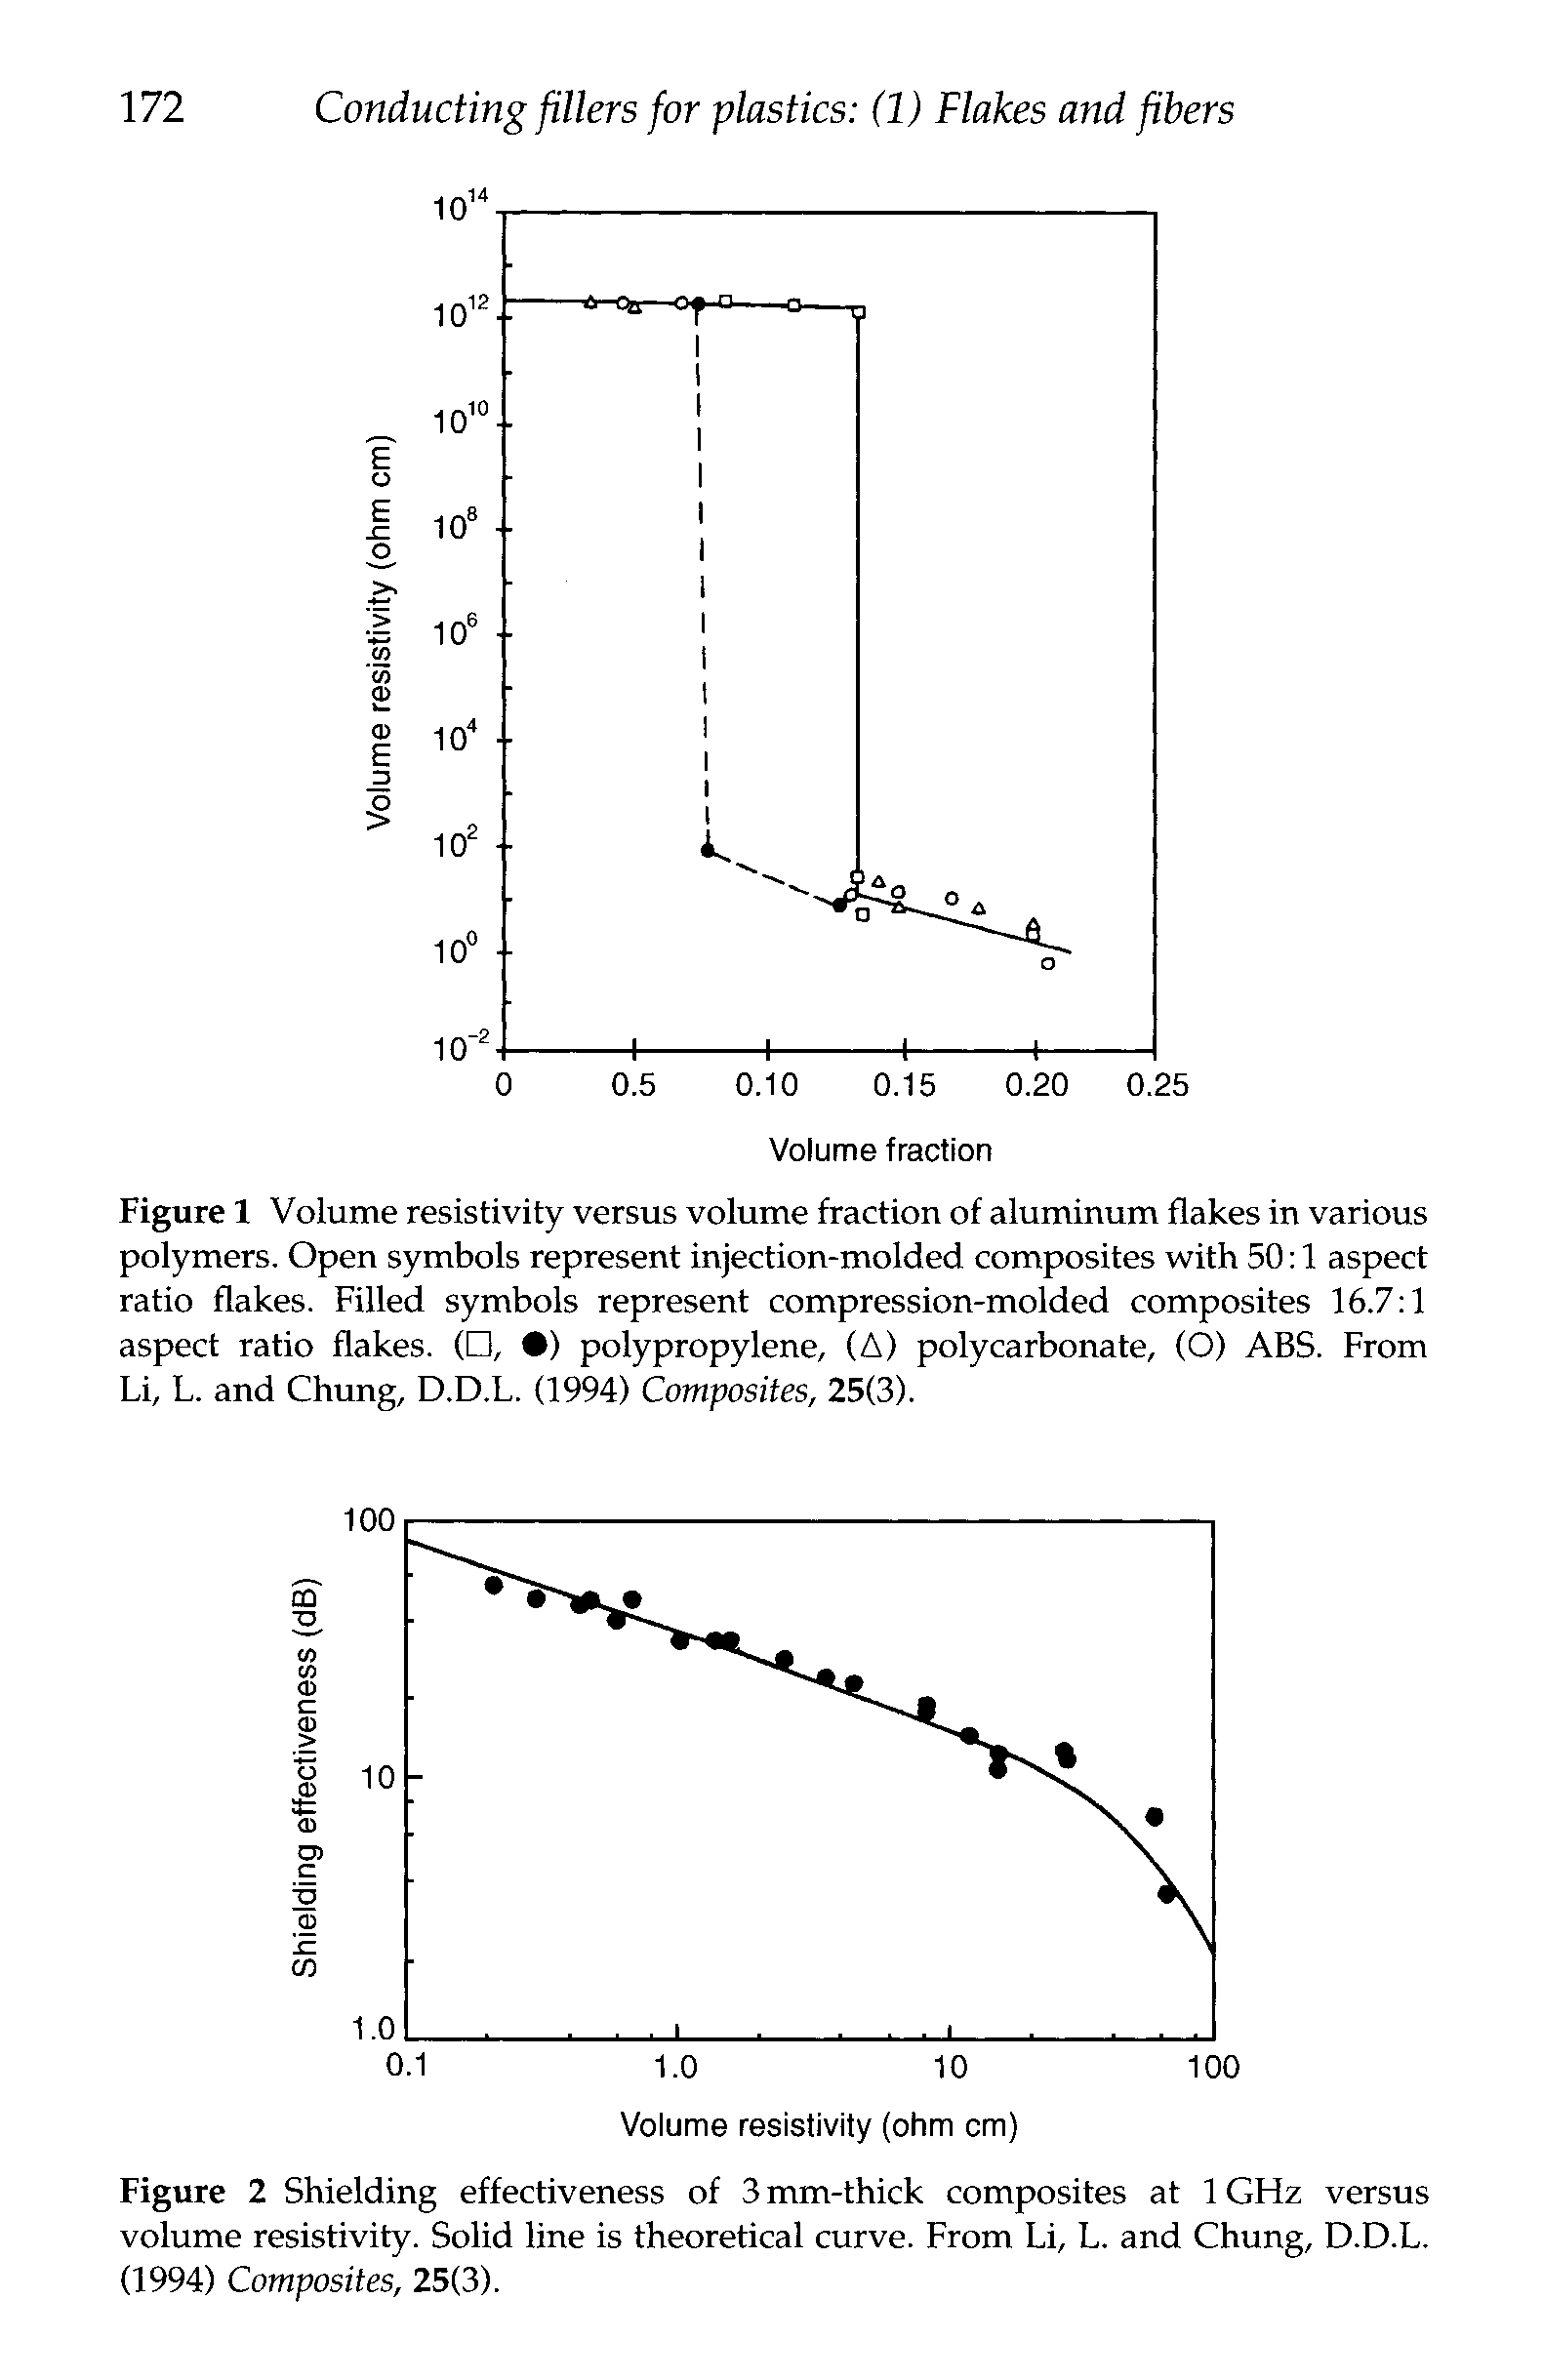 Figure 1 Volume resistivity versus volume fraction of aluminum flakes in various polymers. Open symbols represent injection-molded composites with 50 1 aspect ratio flakes. Filled symbols represent compression-molded composites 16.7 1 aspect ratio flakes. ( , ) polypropylene, (A) polycarbonate, (O) ABS. From Li, L. and Chung, D.D.L. (1994) Composites, 25(3).